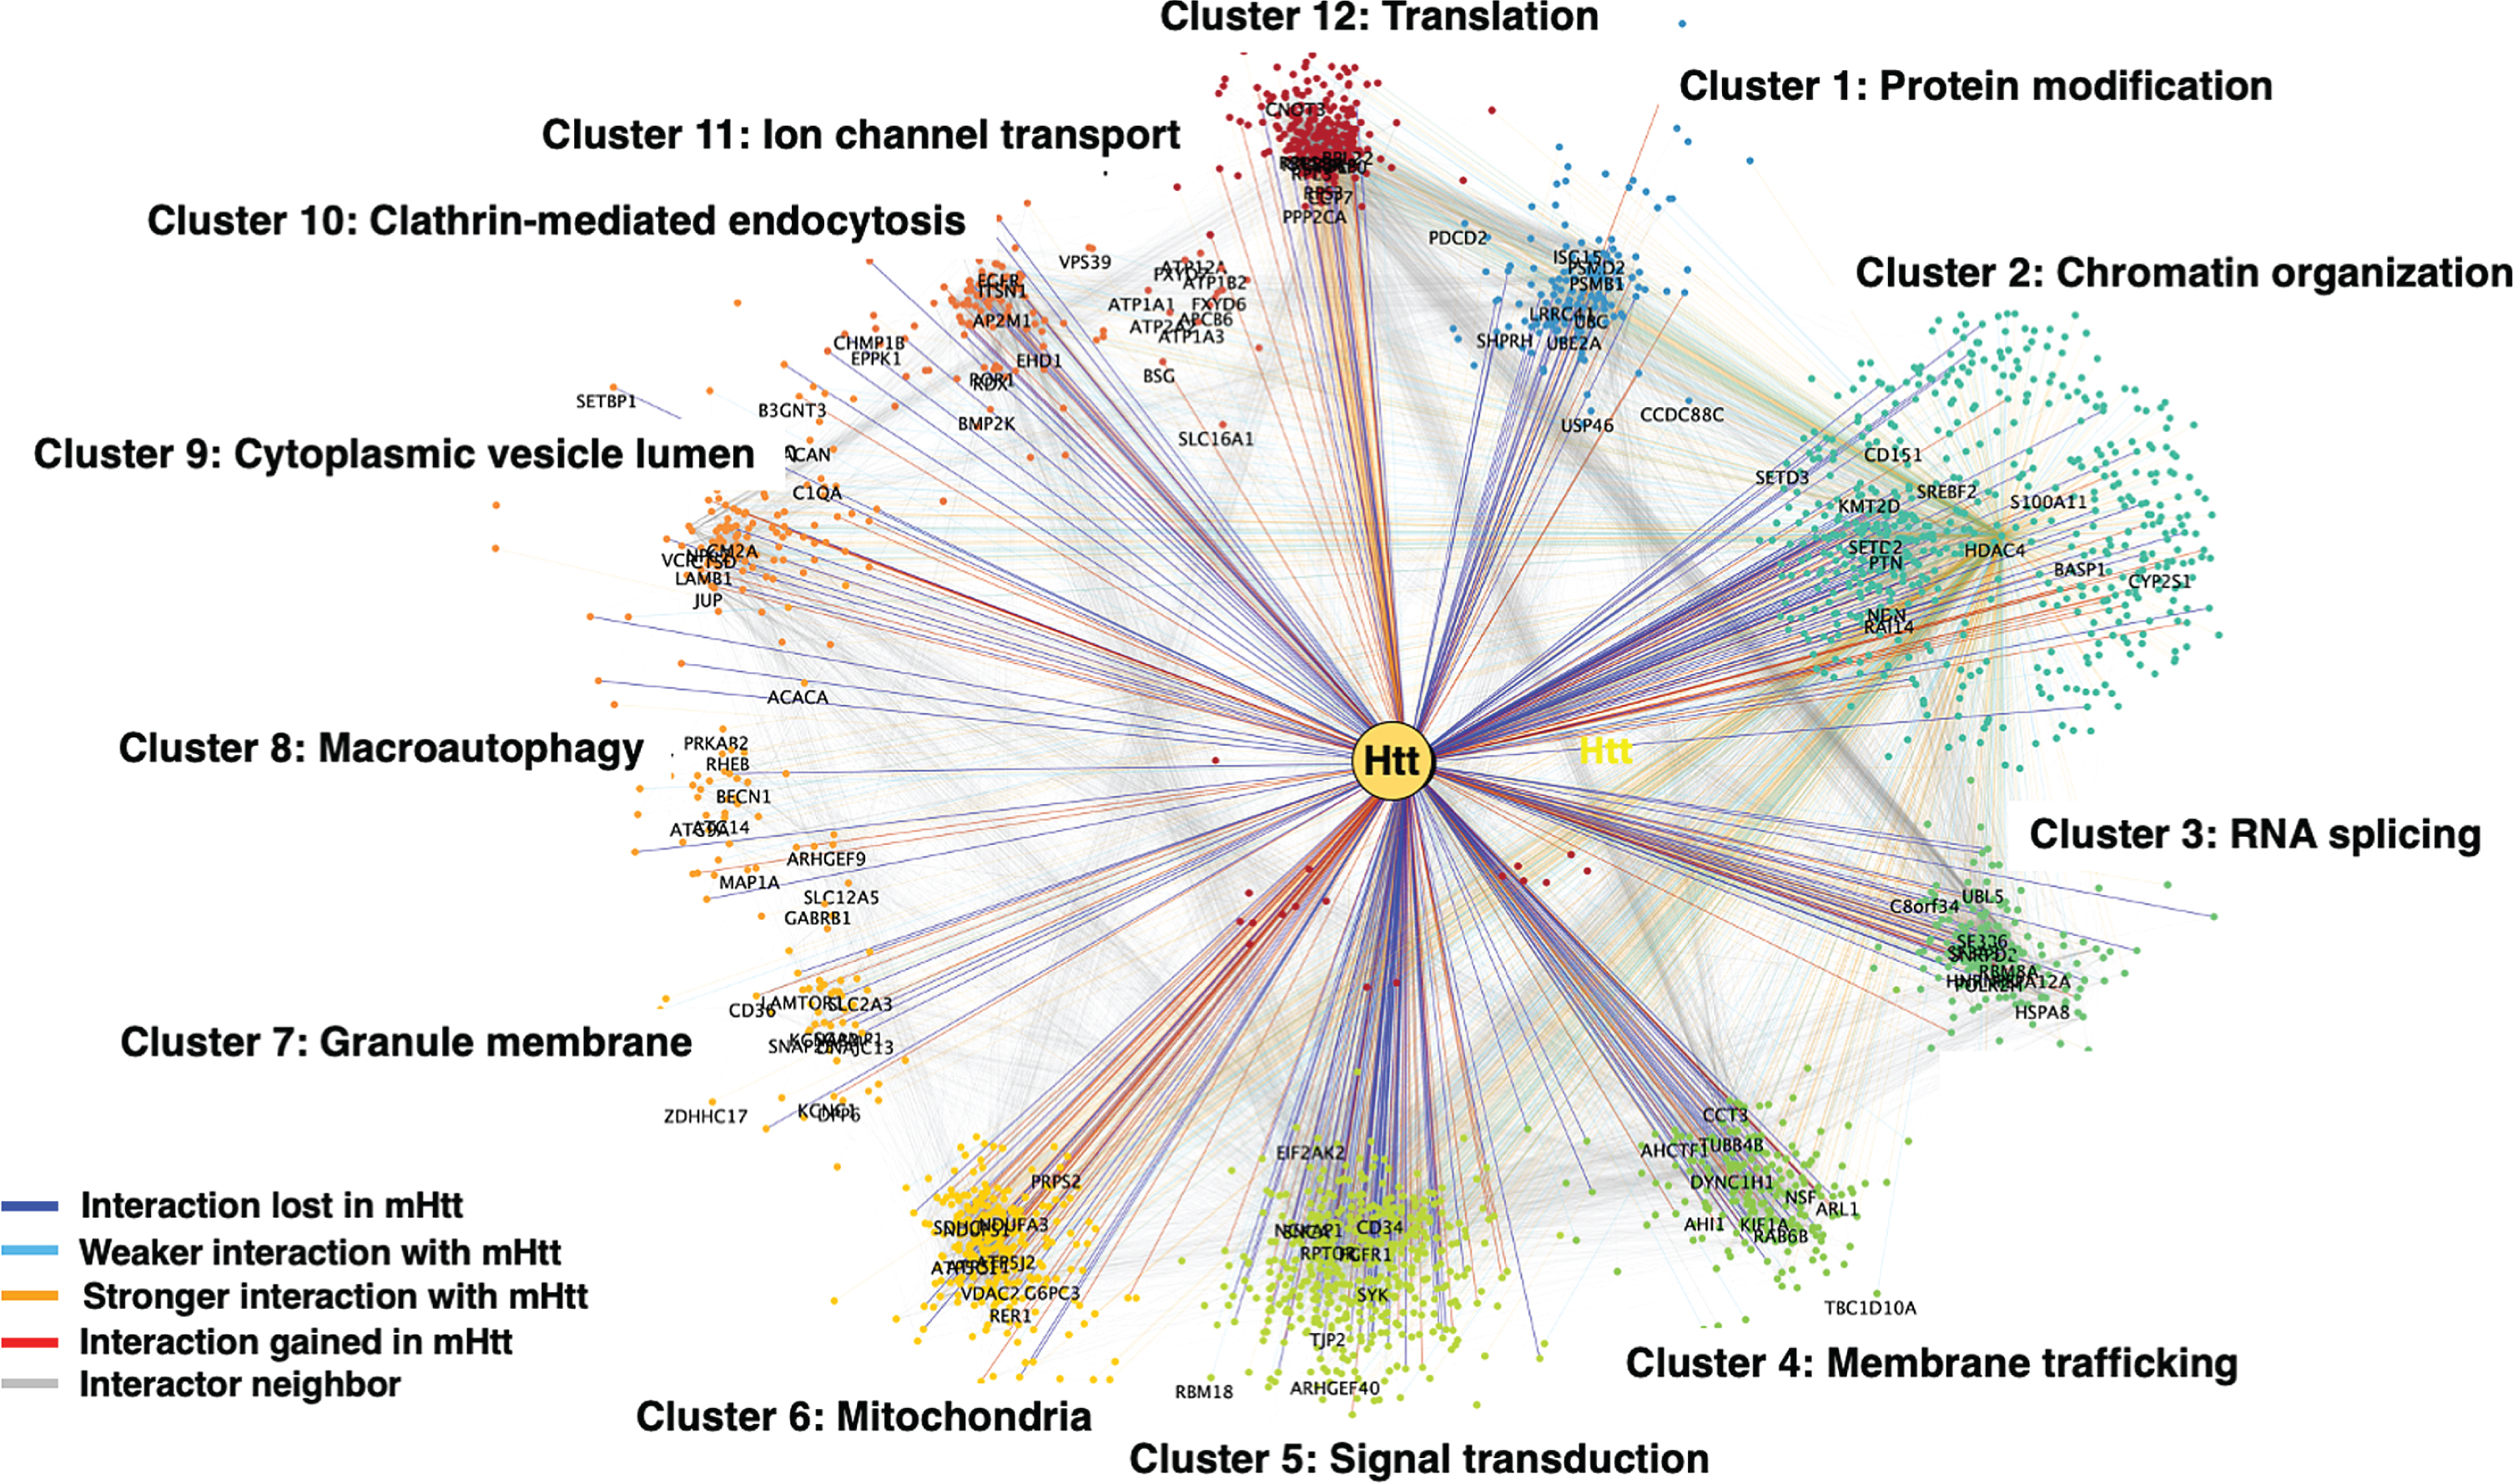 Clustering analysis of Htt interactors by gene ontology (GO). Htt interactors were analyzed for shared functional categories, “clusters,” in different cellular molecular pathways. The cluster networks are illustrated in color-coded format (see key in figure) for interactions that were lost by mutant Htt (mHtt), weaker with mHtt, stronger with mHtt, gained interaction with mHtt, or represented a neighbor.